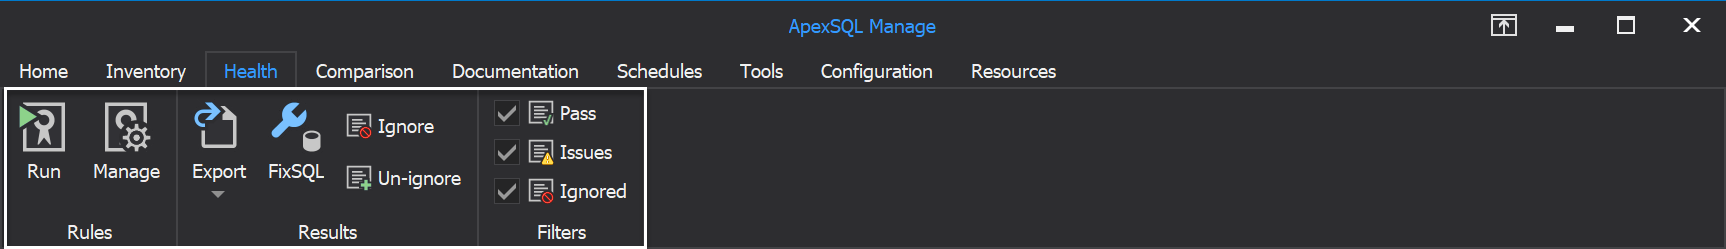 The Health tab of ApexSQL Manage tool